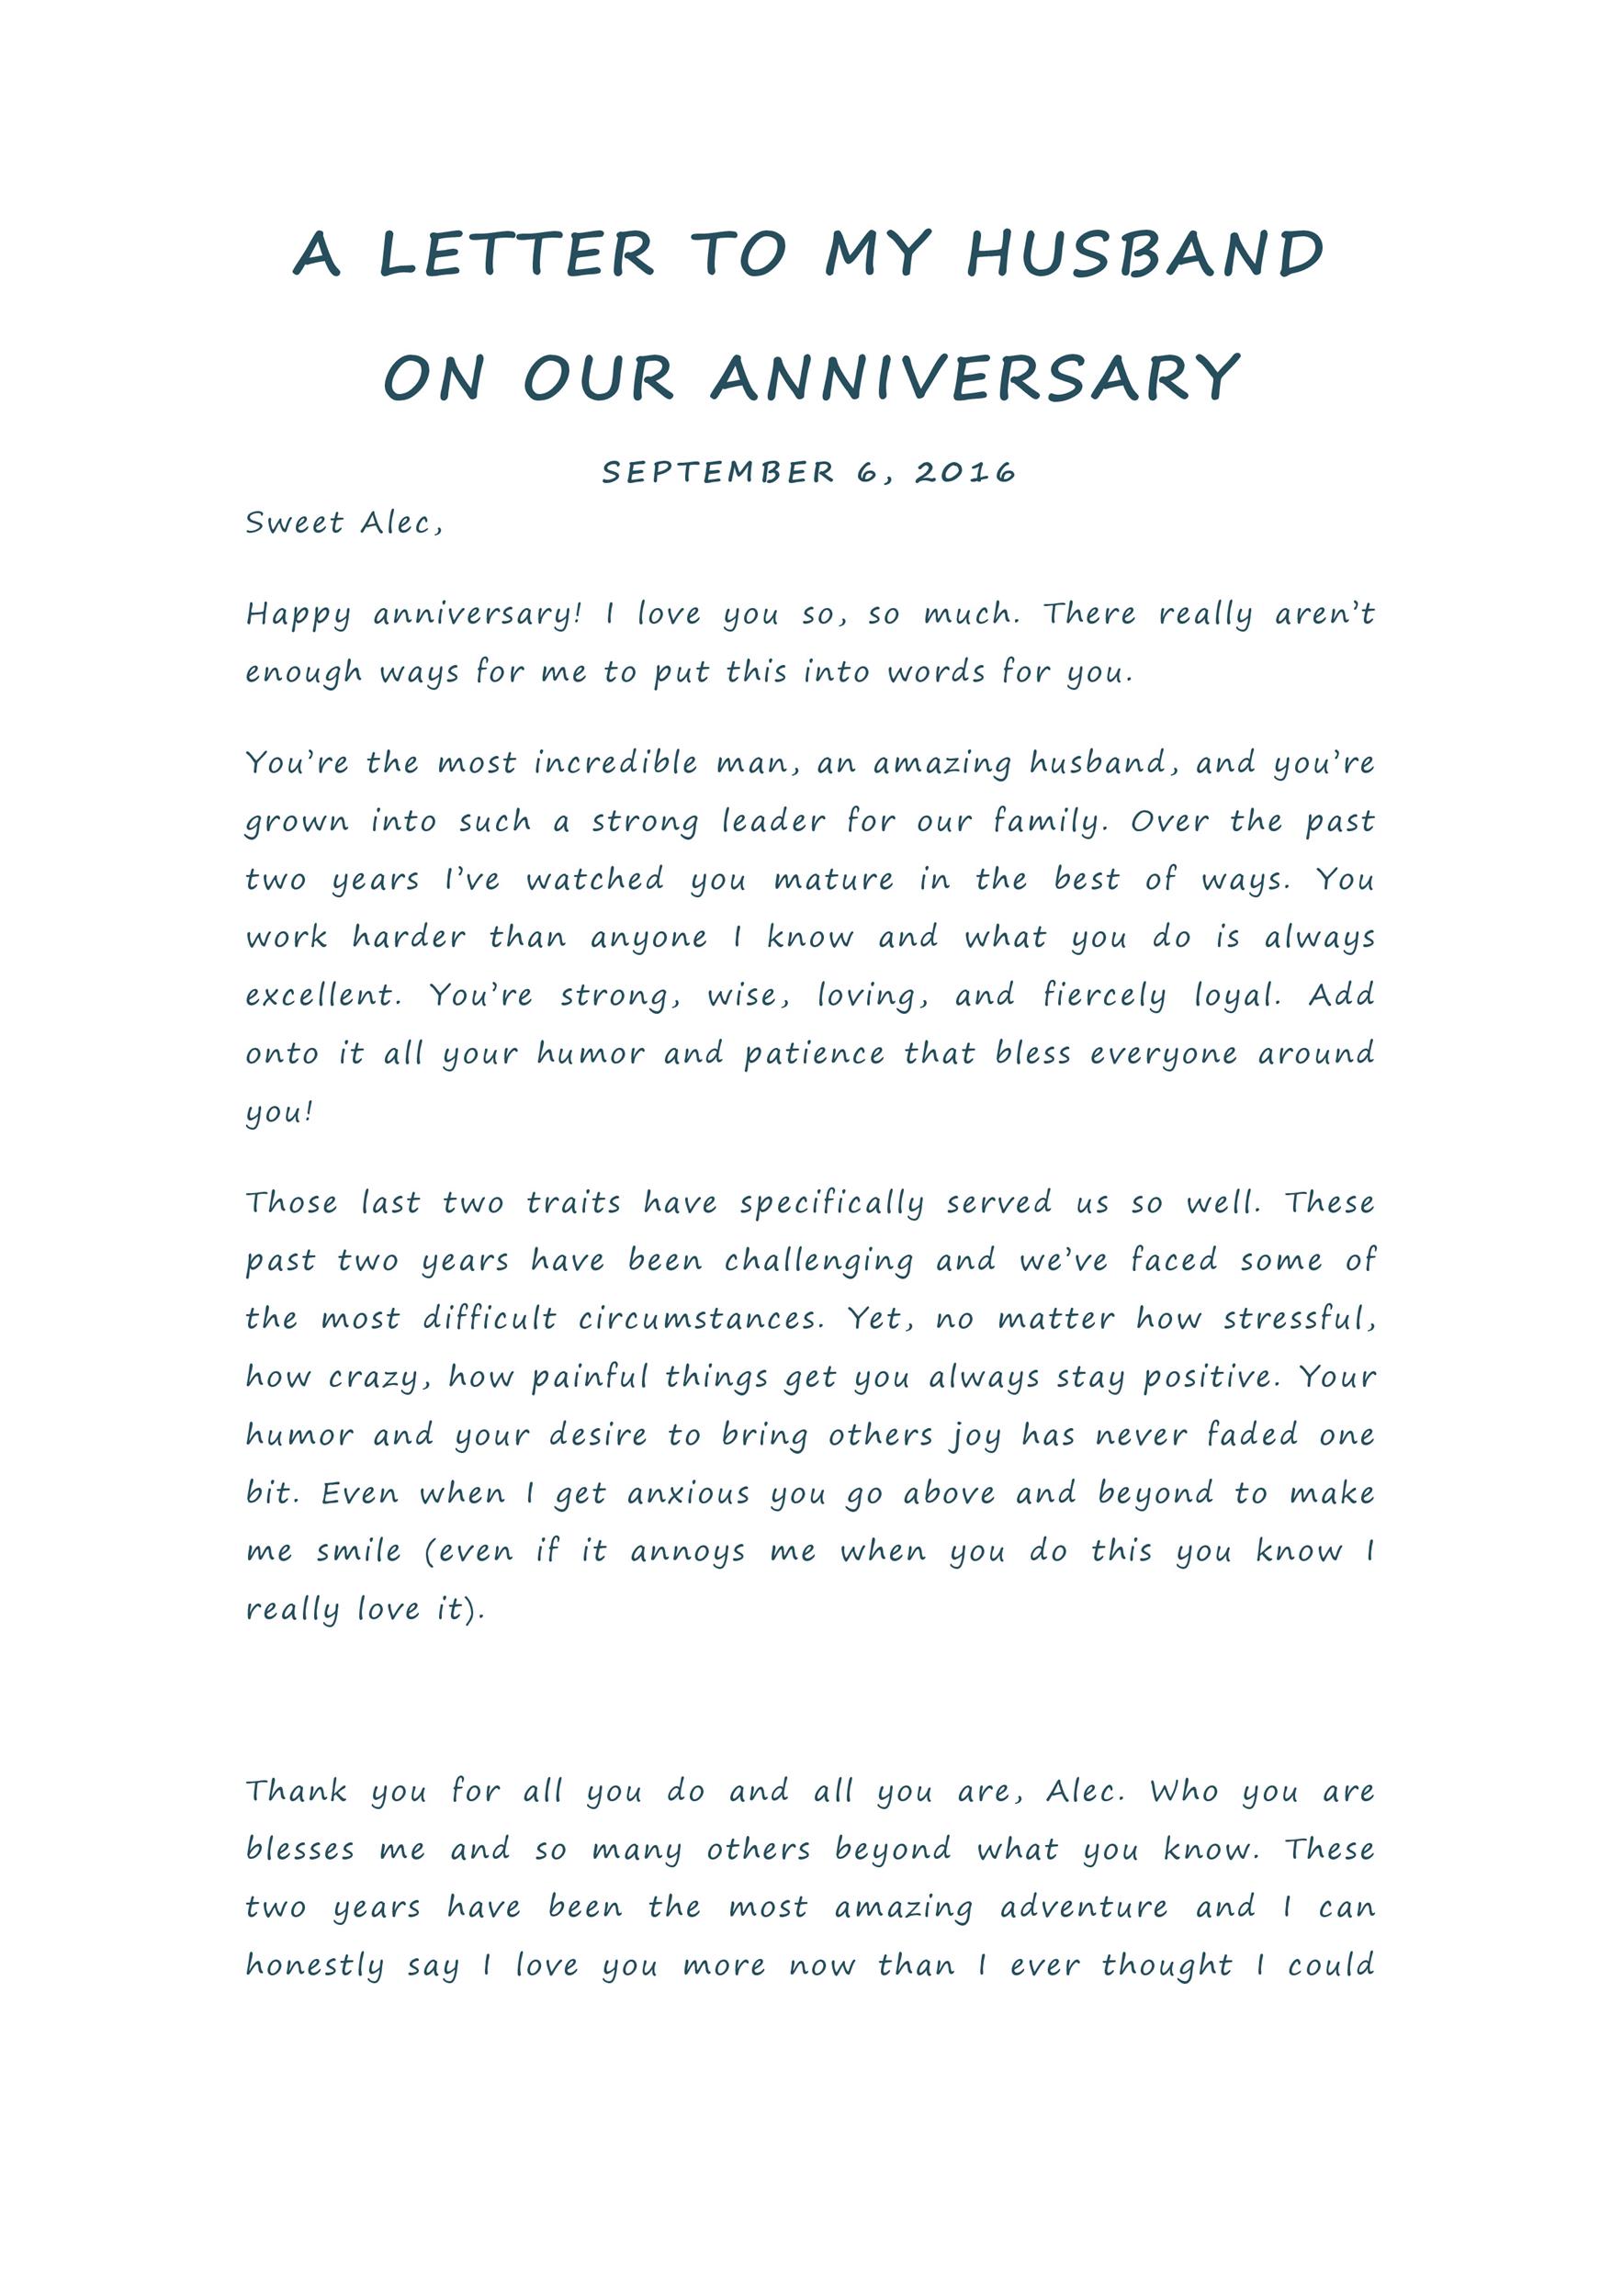 50 Romantic Anniversary Letters (for him or her) ᐅ TemplateLab